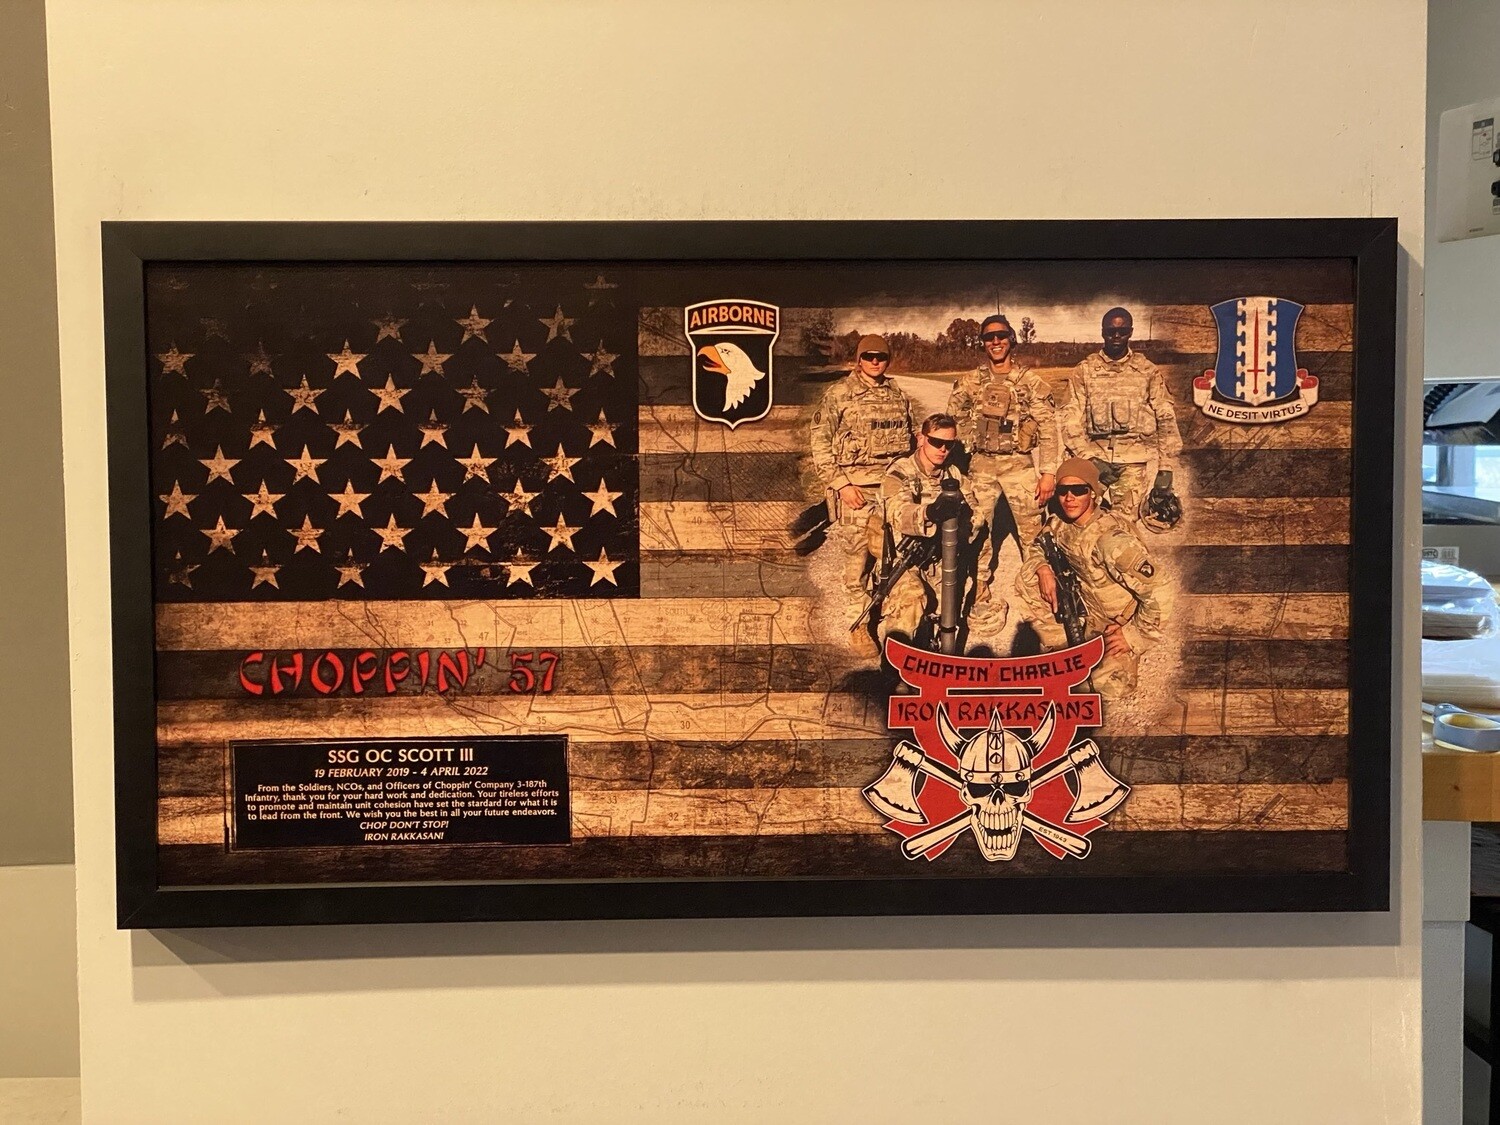 C Co "Choppin'" 3-187 IN Rustic Flag Plaque - 28.25"x15.25"